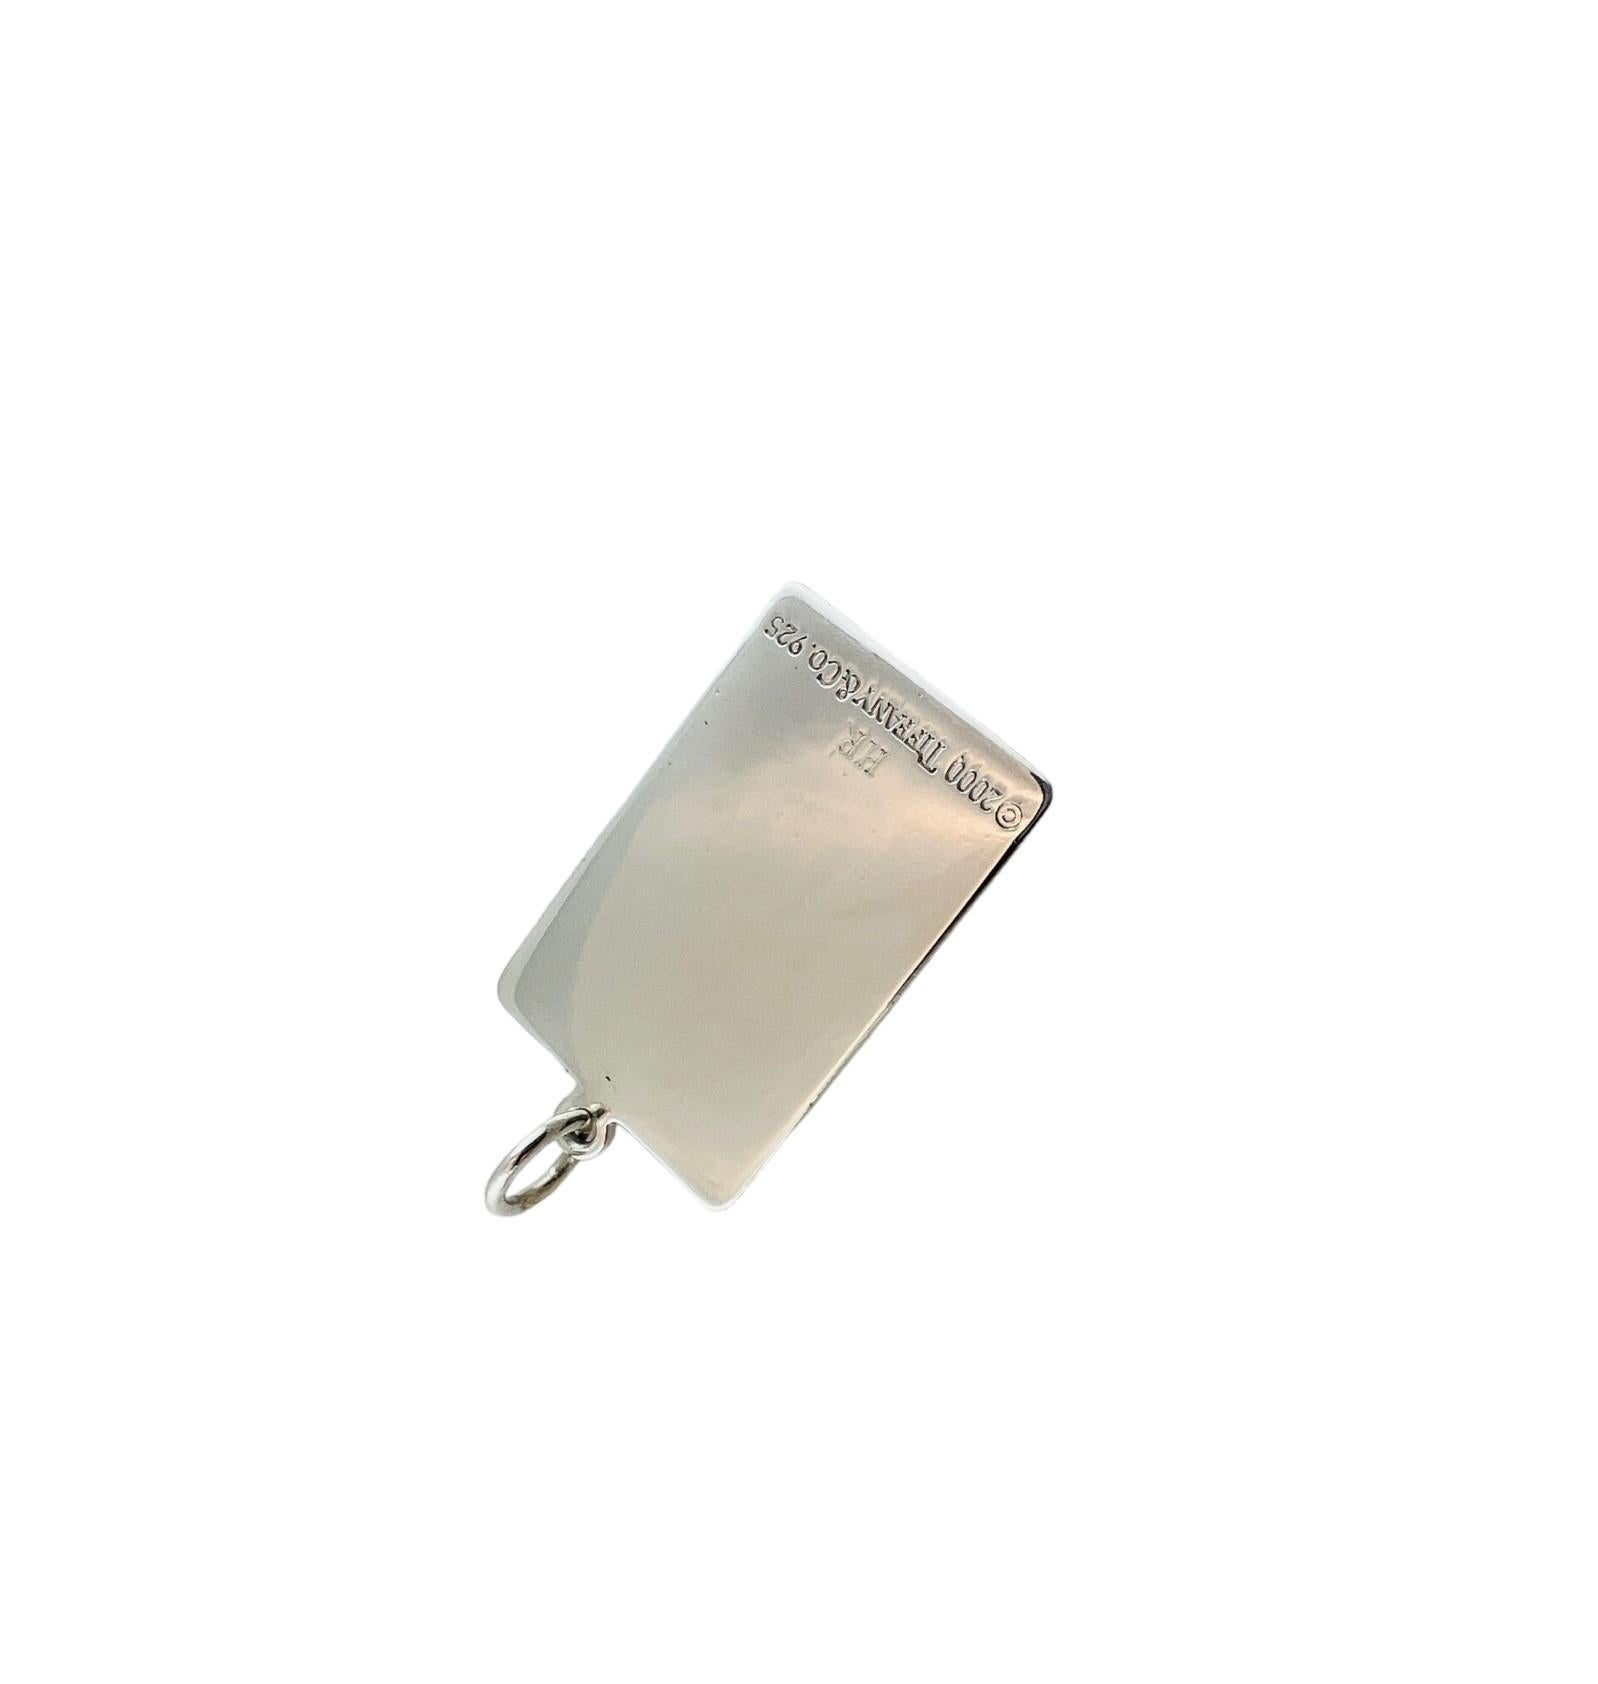 2000 Tiffany & Co. Sterling Silver Welcome Mat Pendant w/Pouch 

This rectangular pendant by Tiffany & Co is in the design of a welcome doormat. It can be used as a key ring as well if ring was added to pendant. 

Approx. 1 1/4